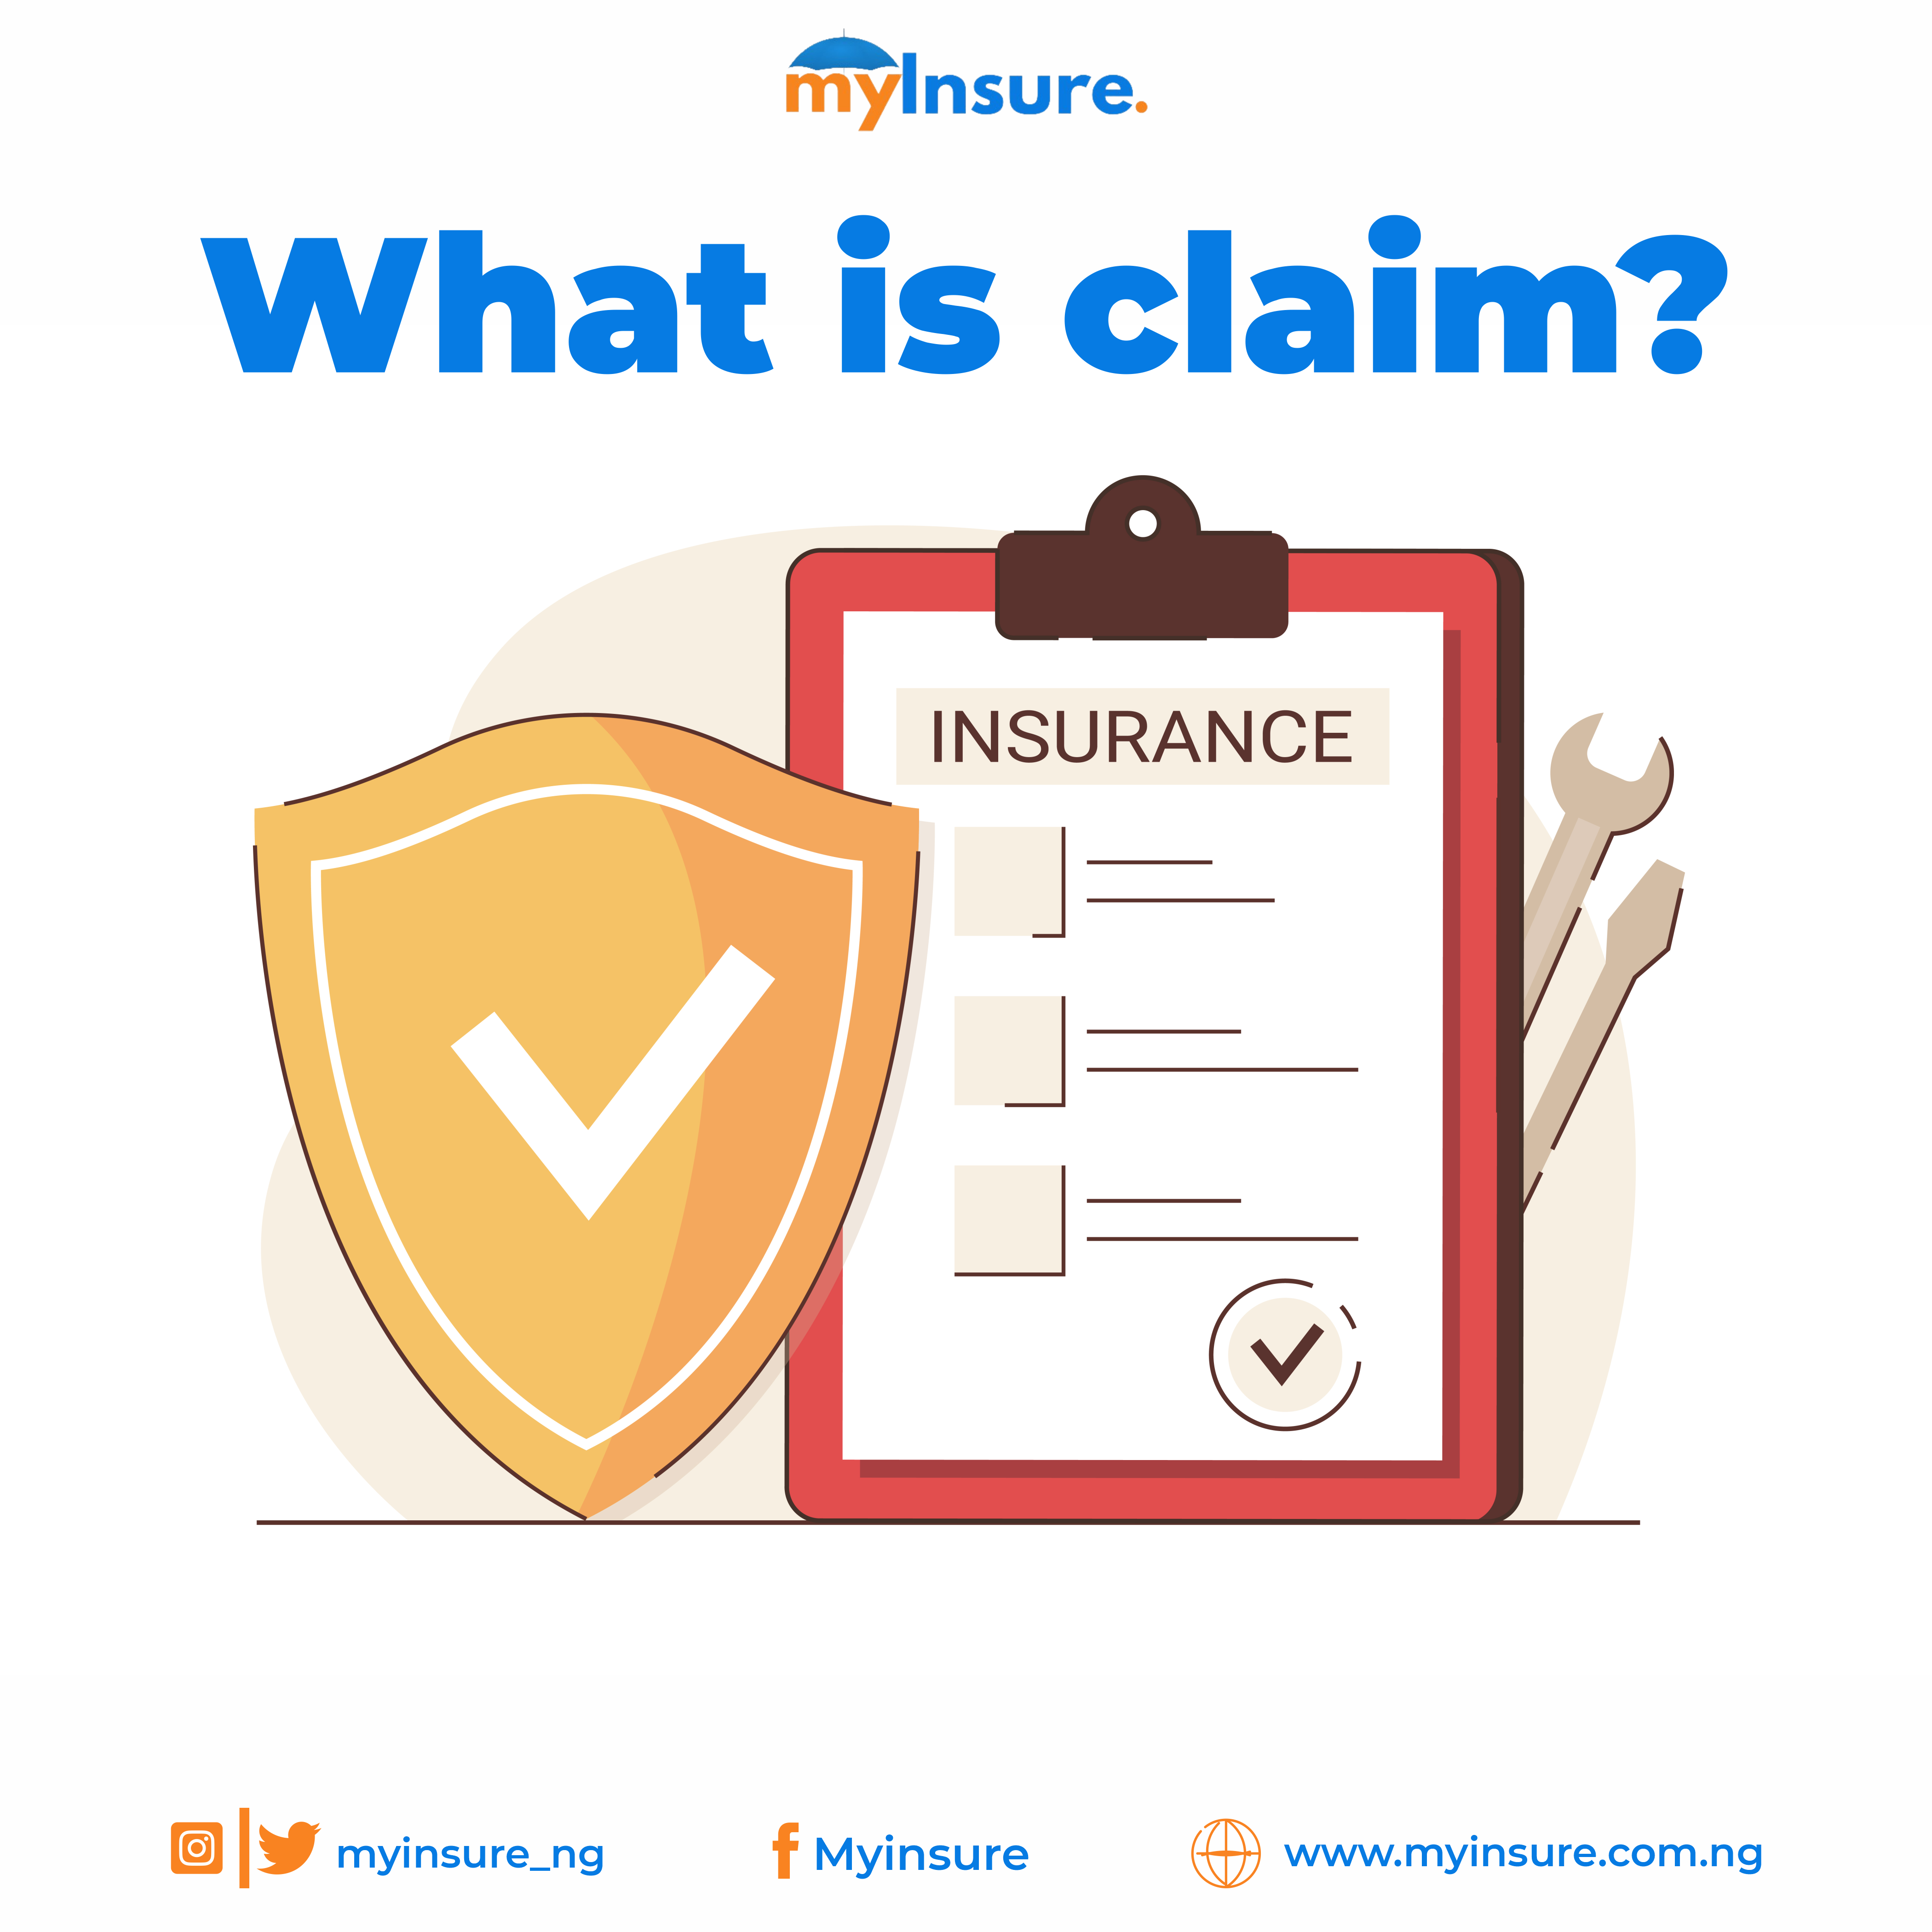 What is Claim?